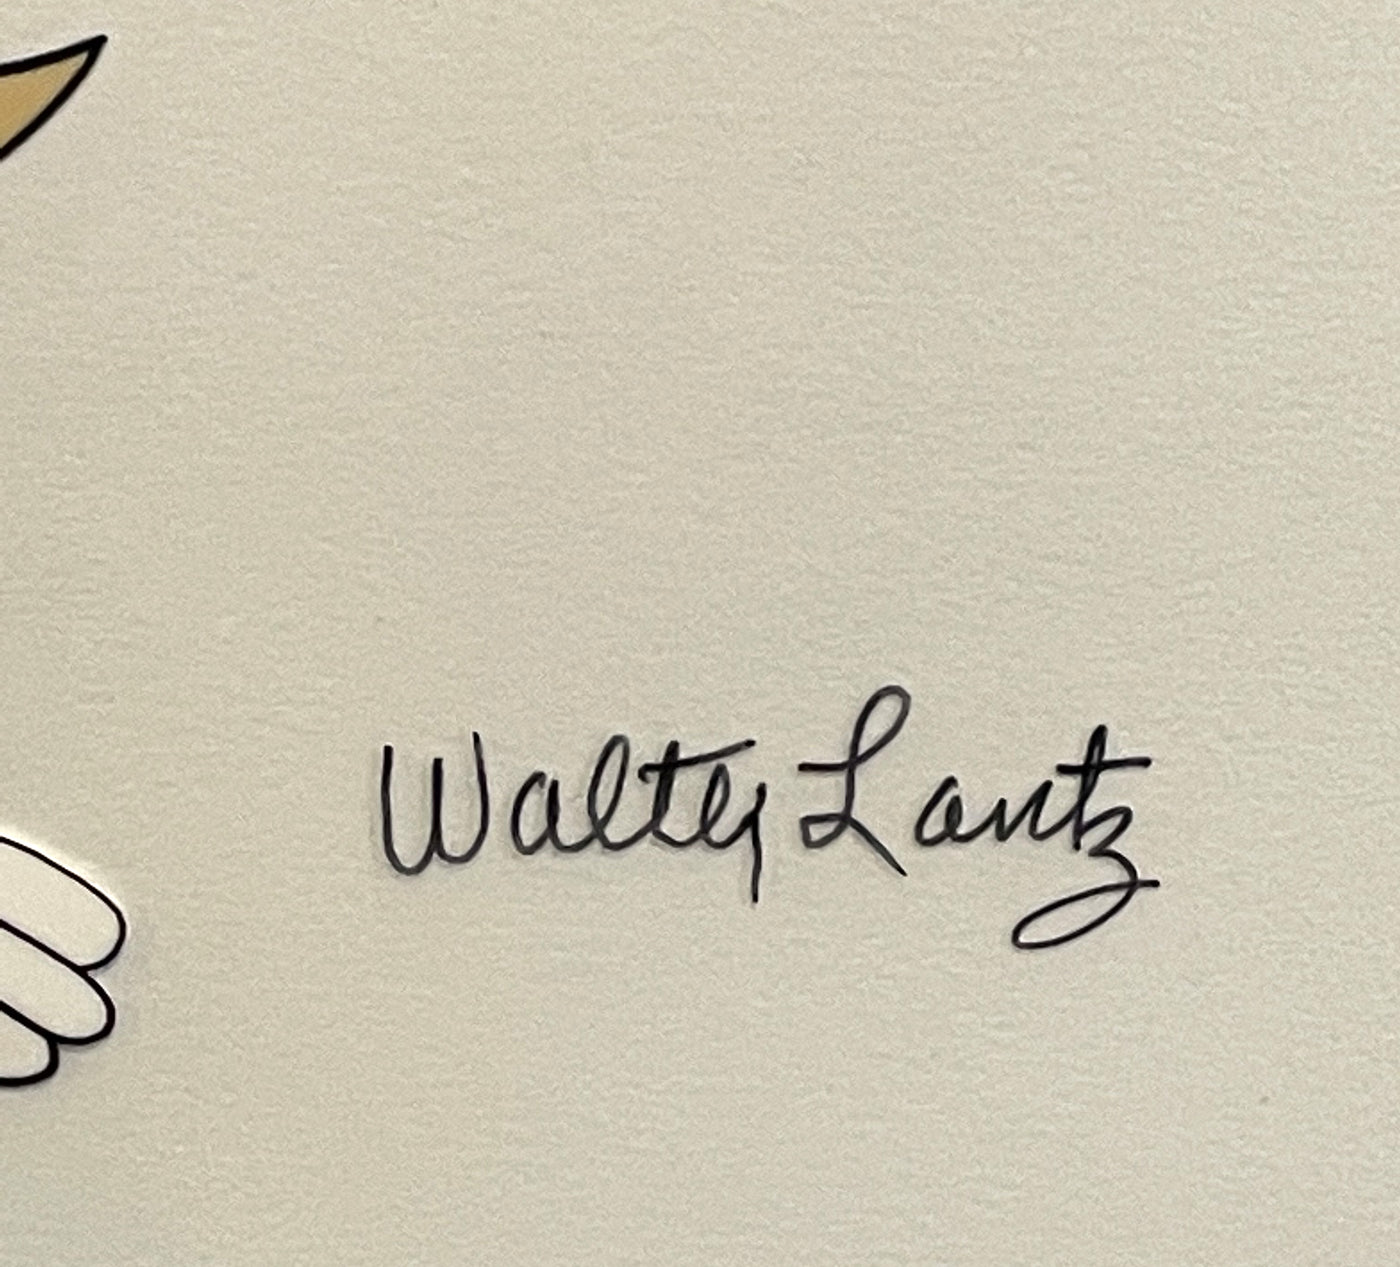 Original Walter Lantz Production Cel Featuring Woody Woodpecker from Flim Flam Fountain (1971), Signed by Walter Lantz